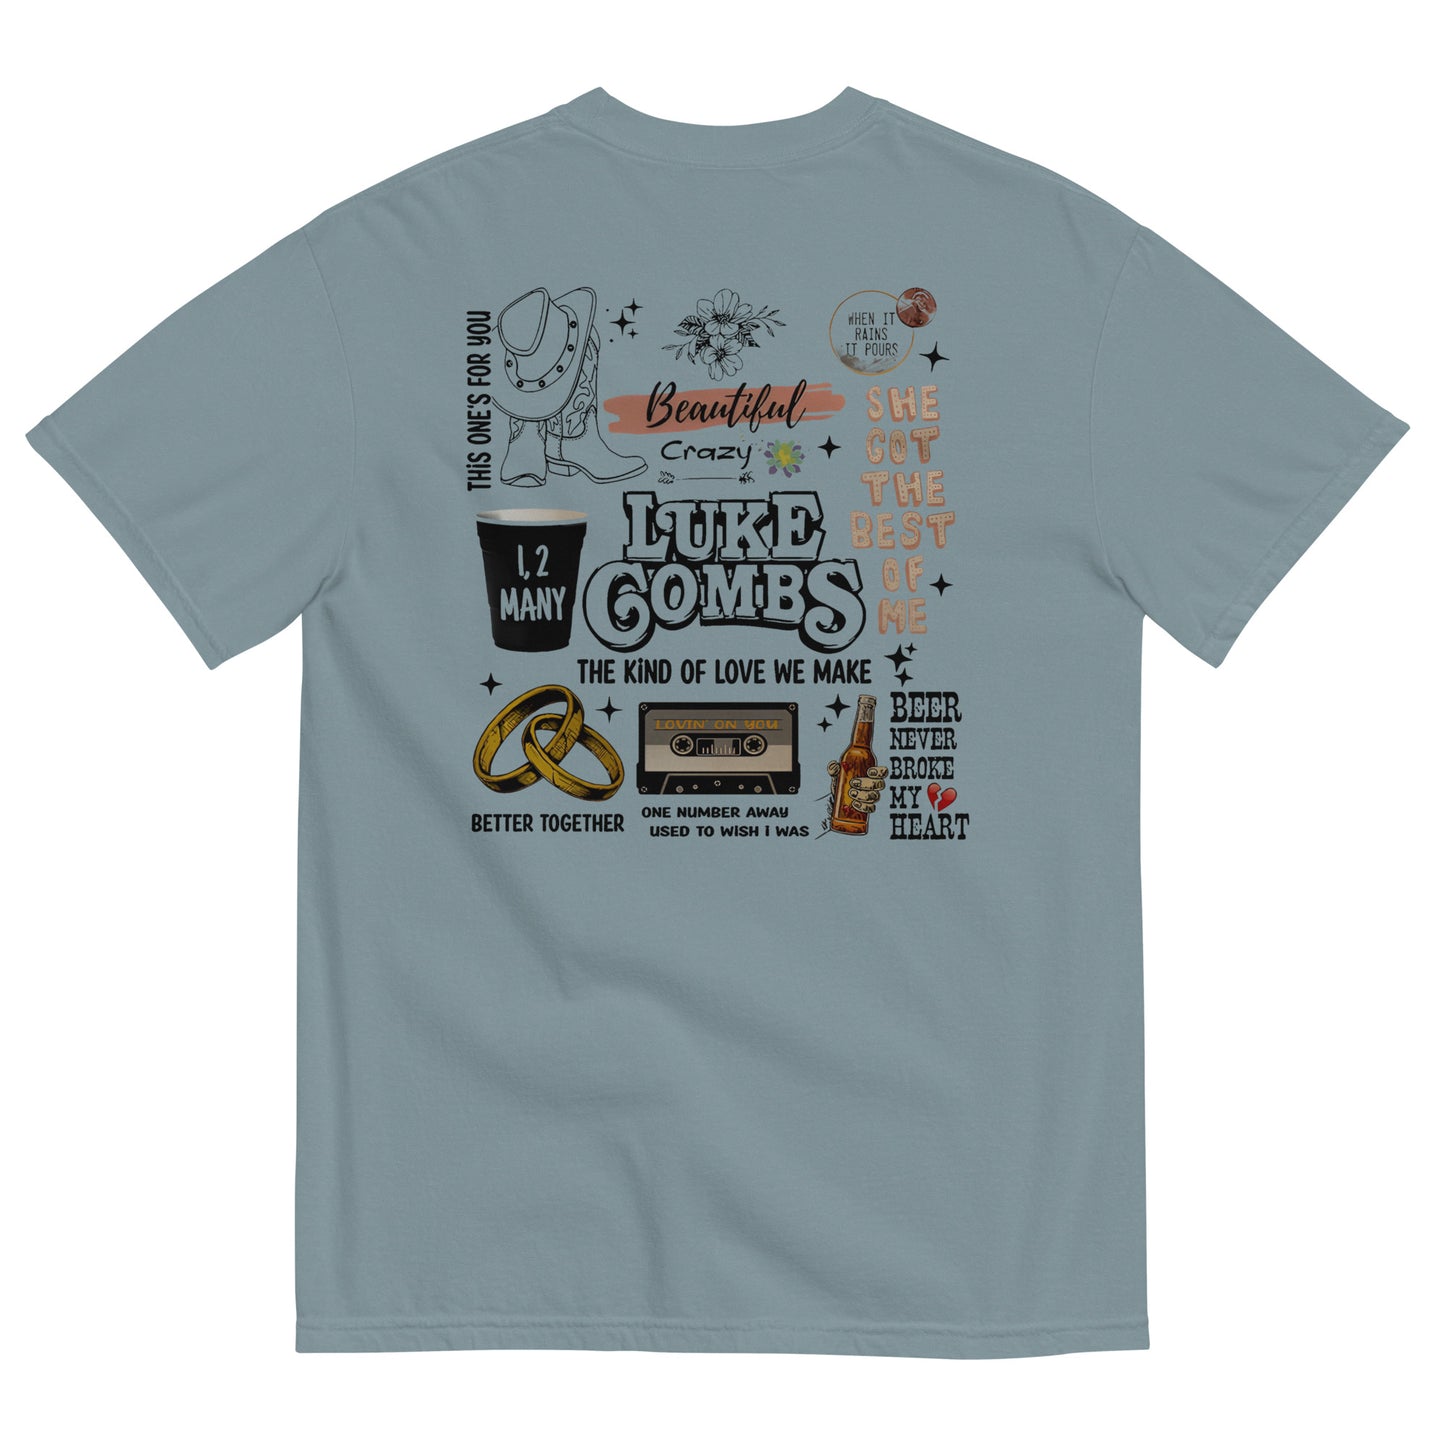 Combs Tour Comfort Colors Graphic Tee